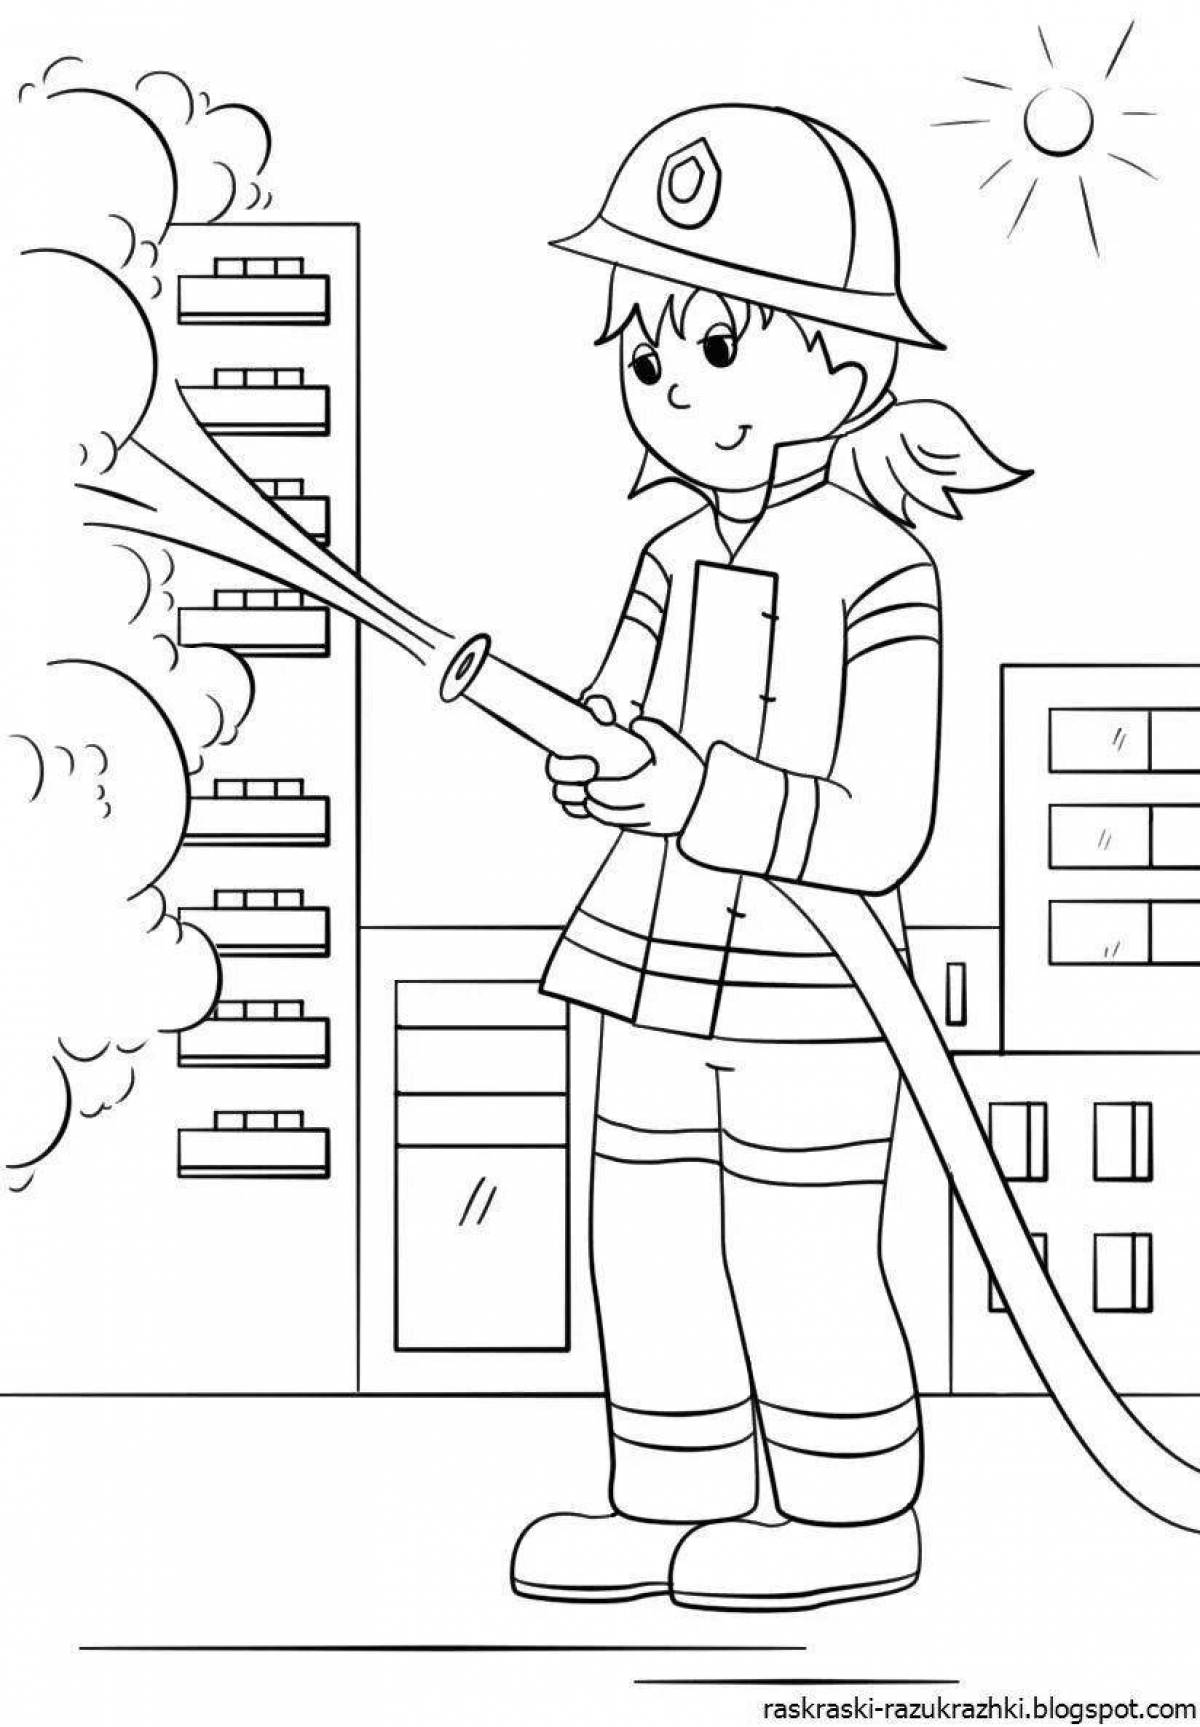 Attractive fire safety coloring book for kindergarten